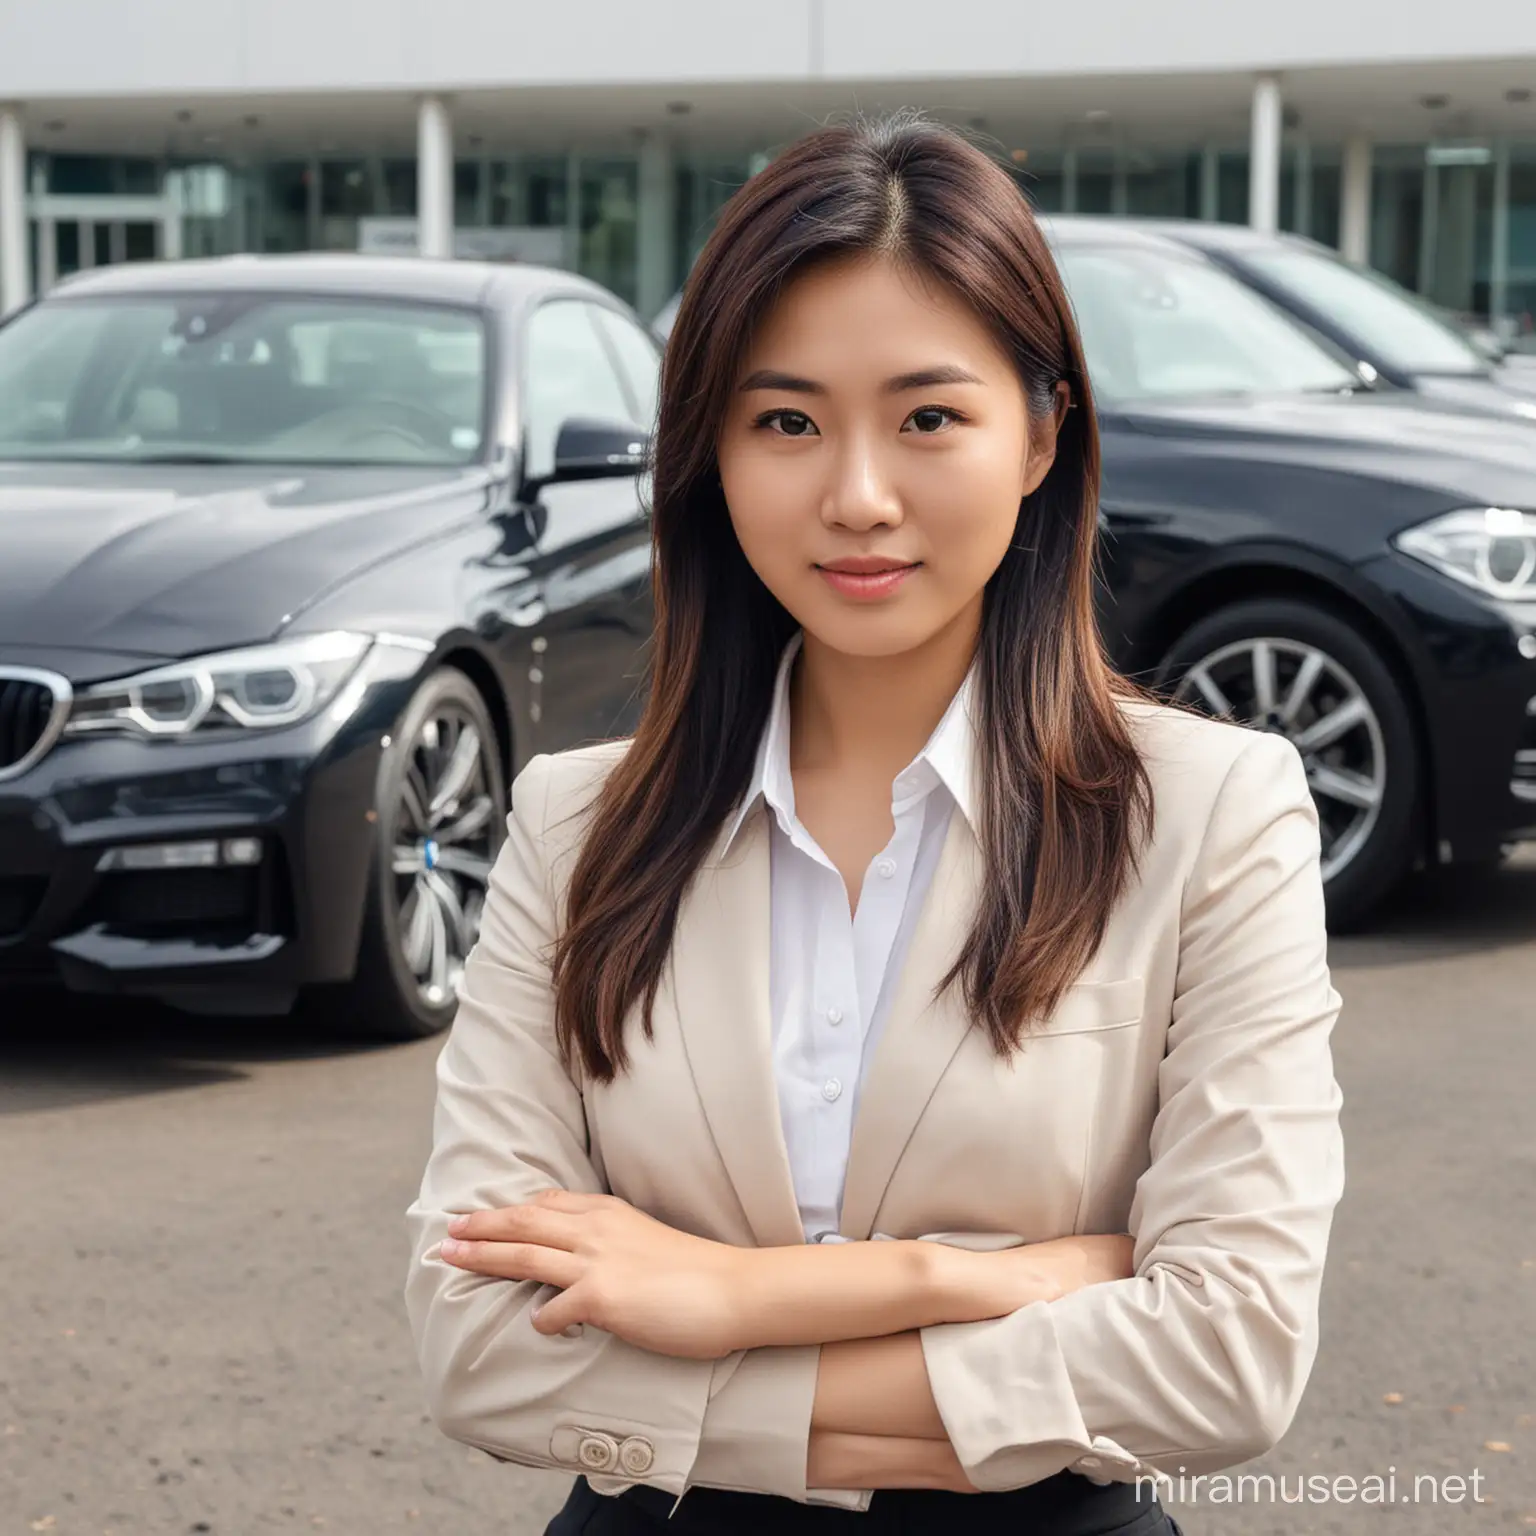 TIME FOR CHANGE, do not alter the words, must be clearly easy to read, include young asian business woman, include BMW car

